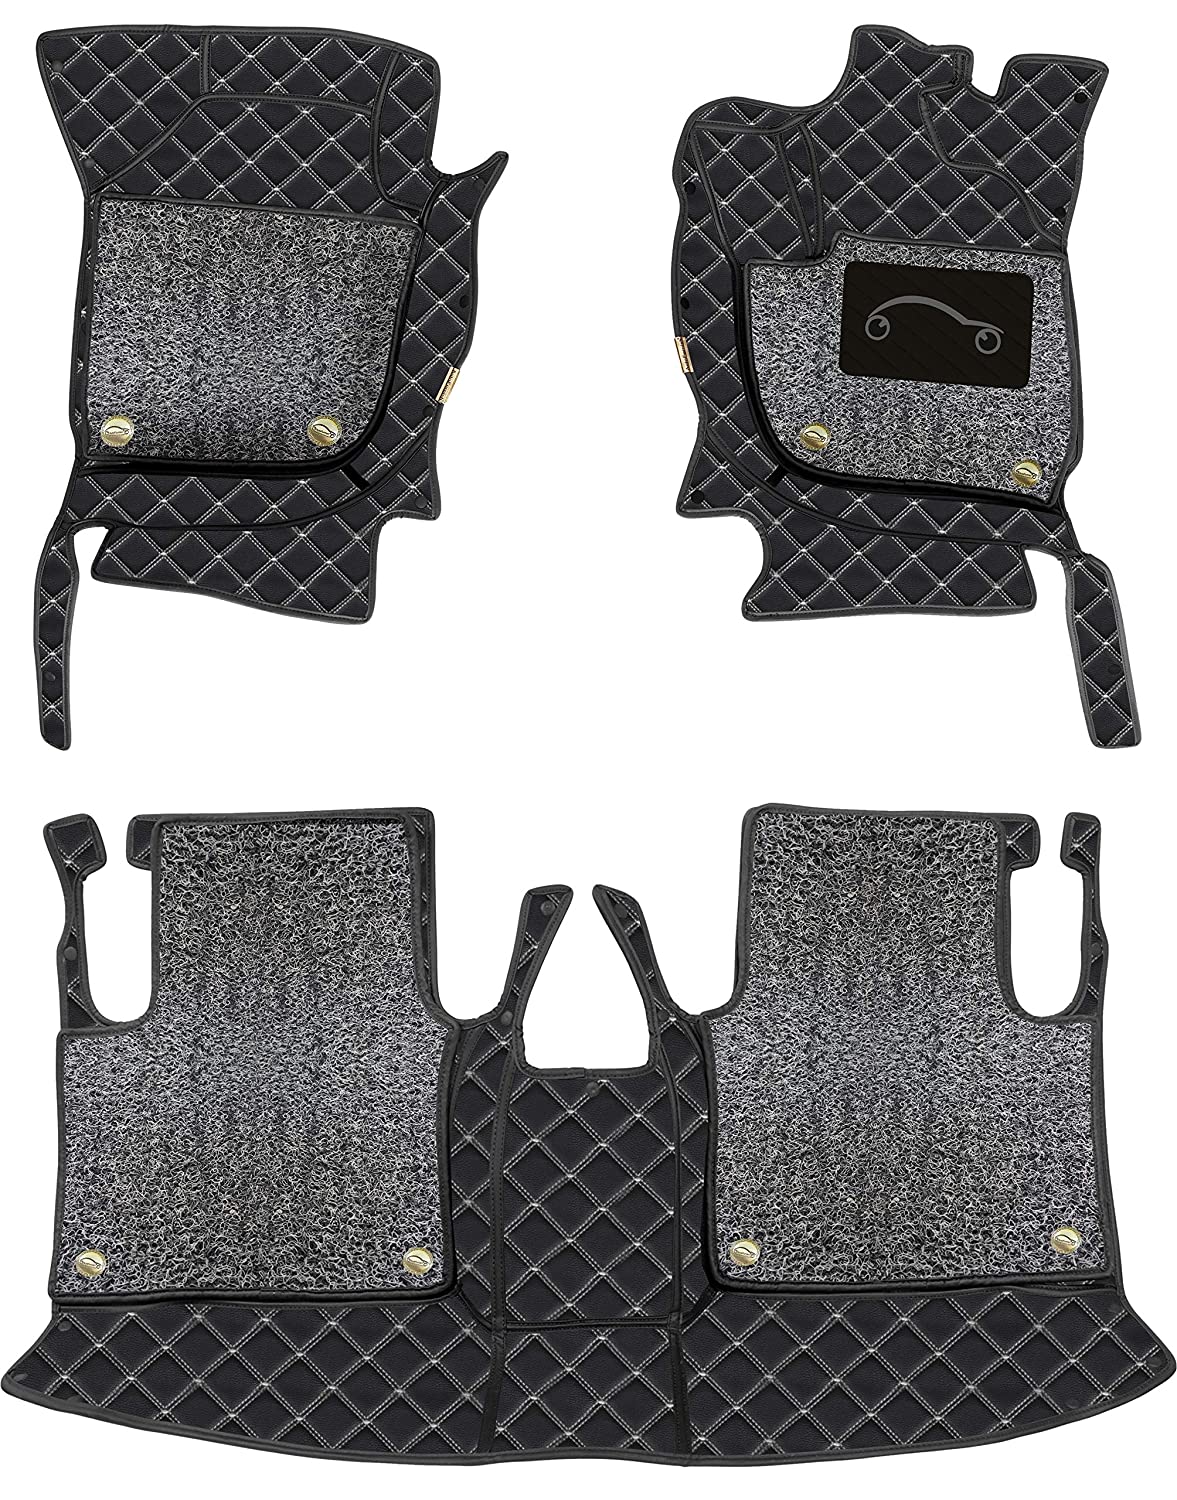 Mercedes C200 Kompressor 2008 7D Luxury Car Mat, All Weather Proof, Anti-Skid, 100% Waterproof & Odorless with Unique Diamond Fish Design (24mm Luxury PU Leather, 2 Rows)